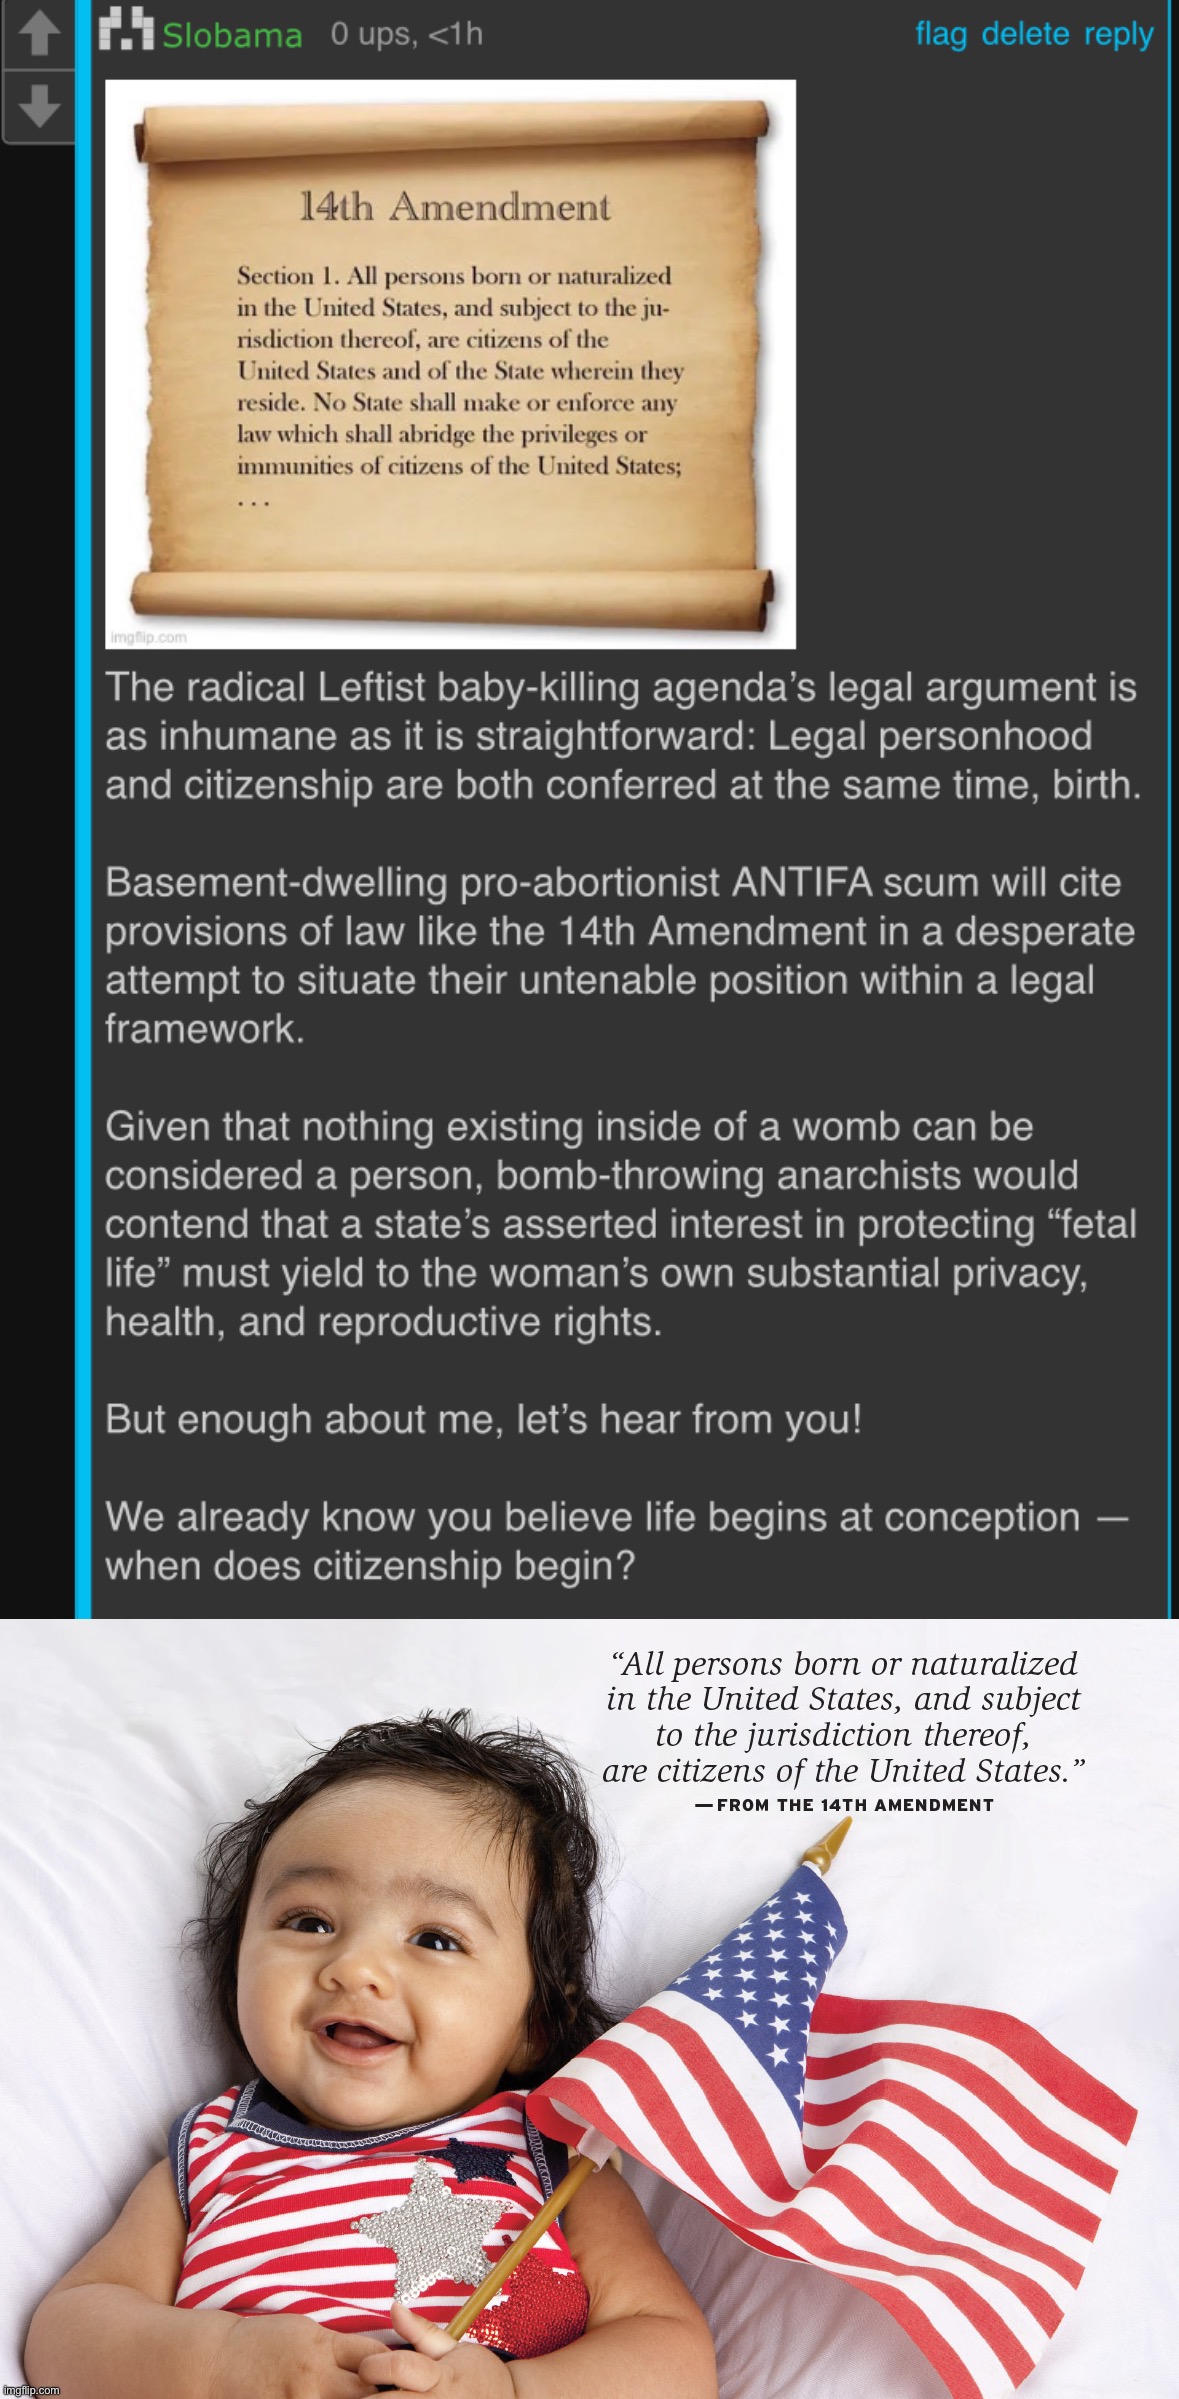 The straightforward legal case for abortion rights, served with a heaping helping of unnecessary stock right-wing vitriol | image tagged in sloth roast pro-choice,14th amendment birthright citizenship,pro-choice,abortion,womens rights,human rights | made w/ Imgflip meme maker